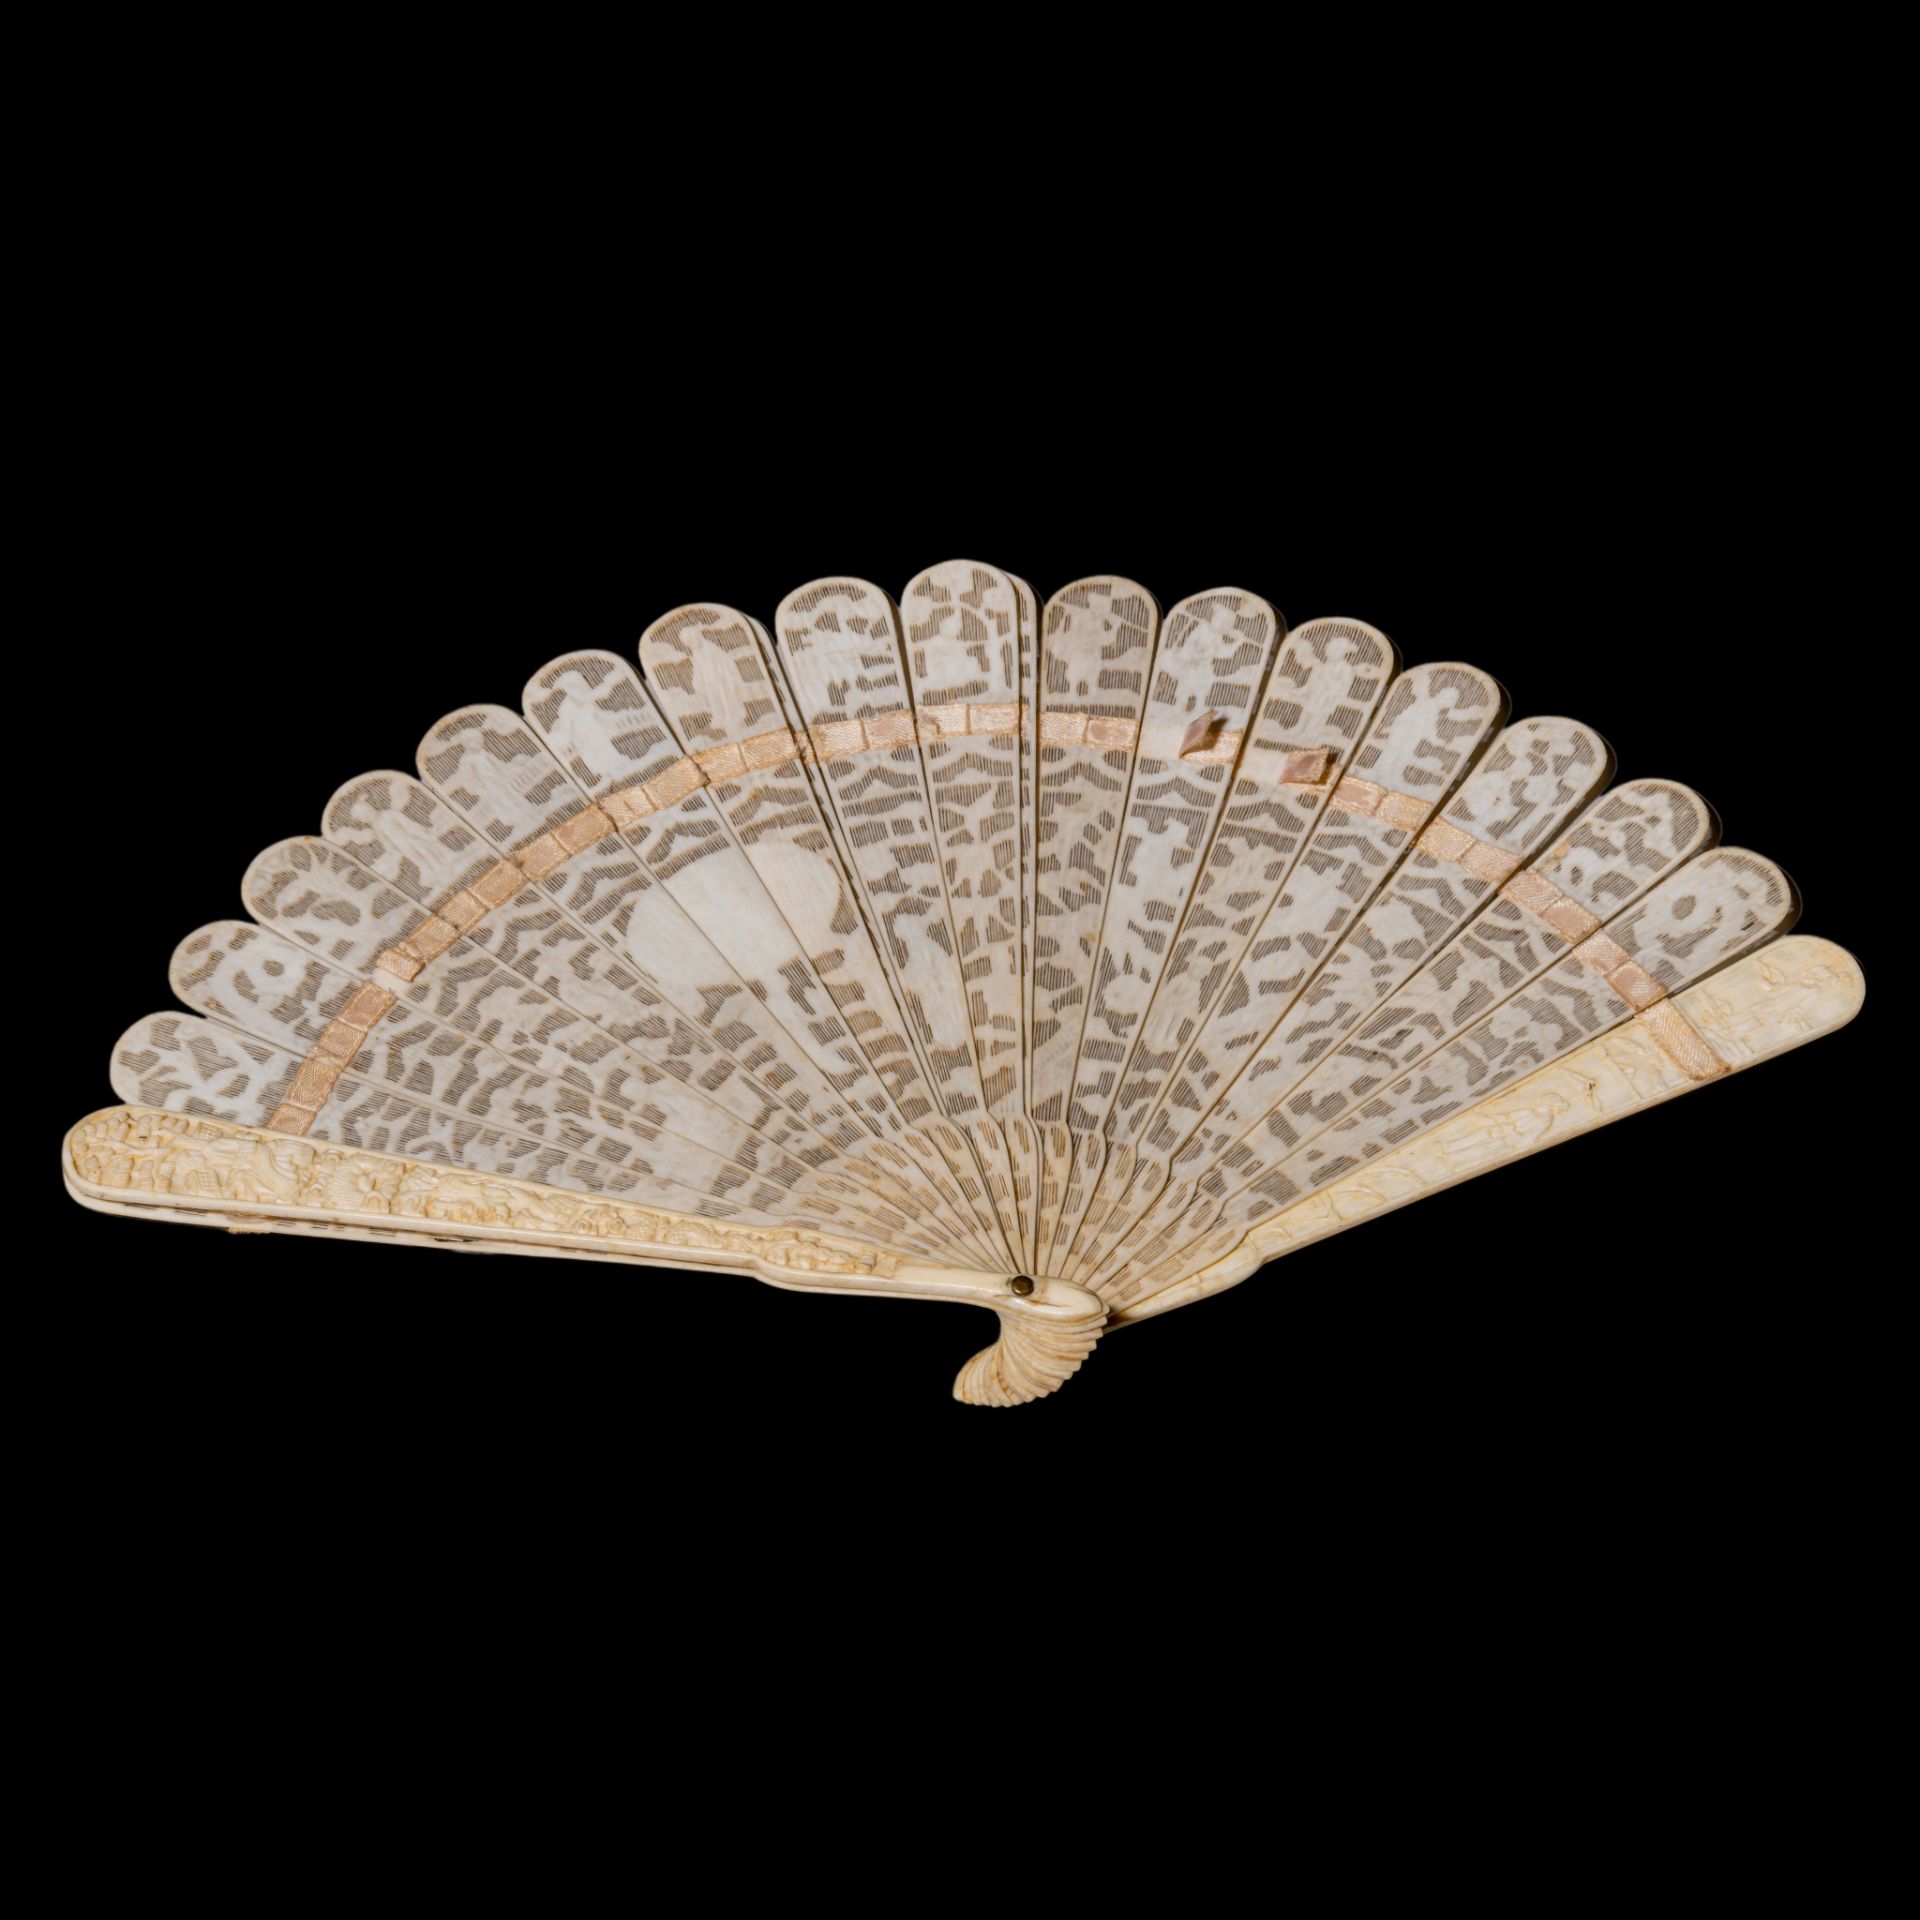 Three Chinese late Qing / early Republic ivory fans, H 16,4 - 19,4 - 20,3 cm / 39 - 77 - 54 g. - W f - Bild 11 aus 12